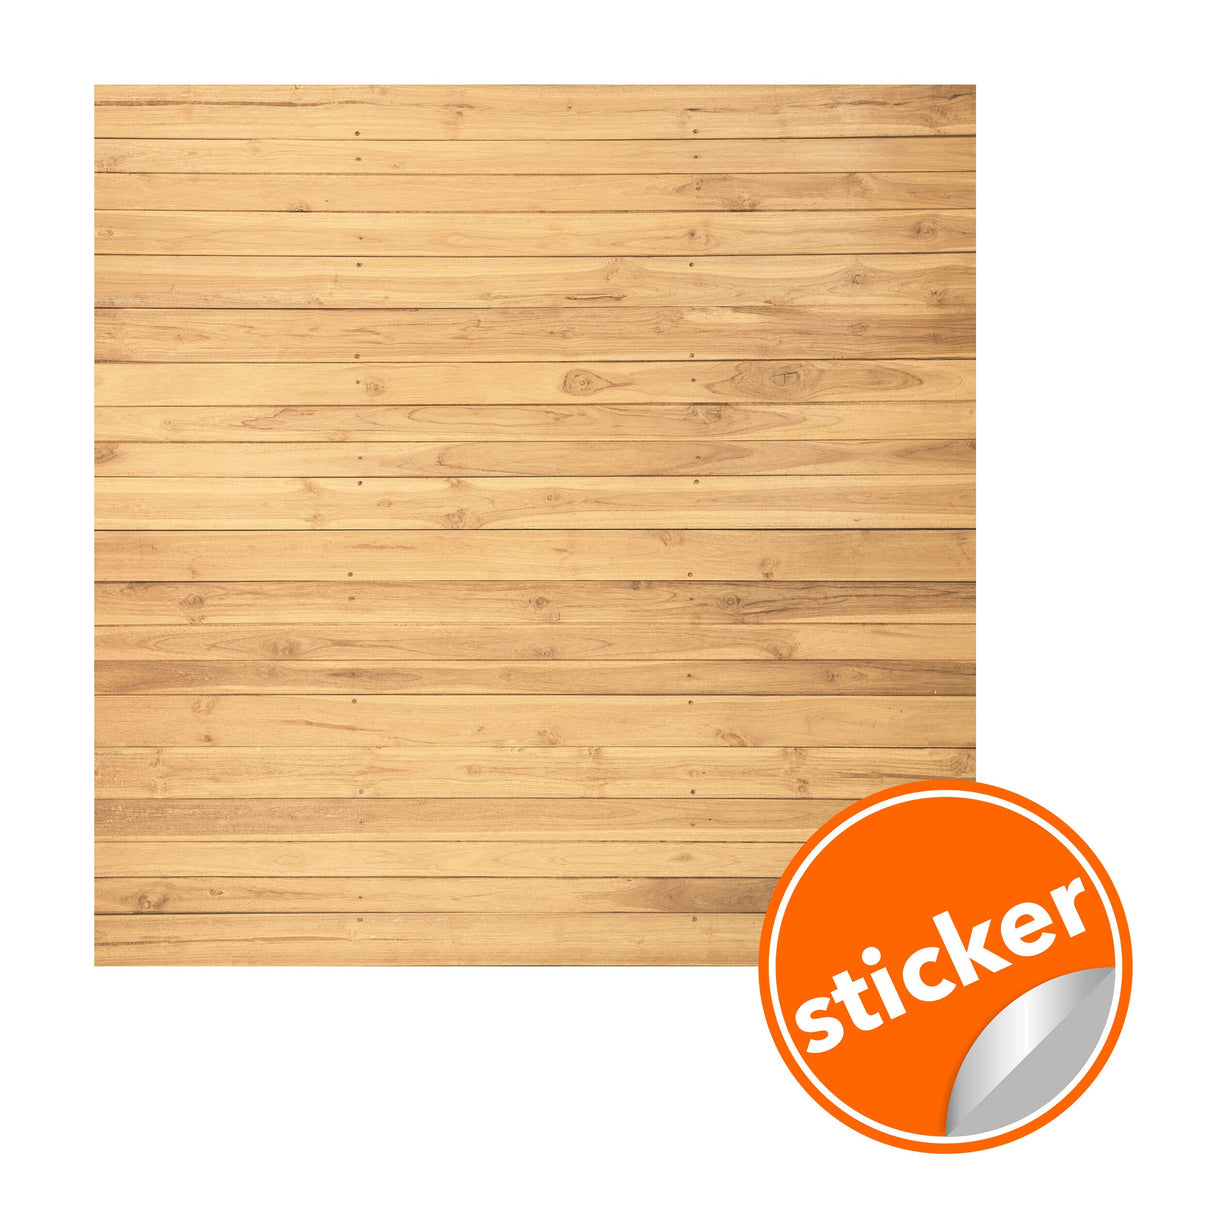 Shiplap Peel And Stick Wallpaper Sticker - Self Adhesive Contact Fake Wood Plank Wall Paper Decal